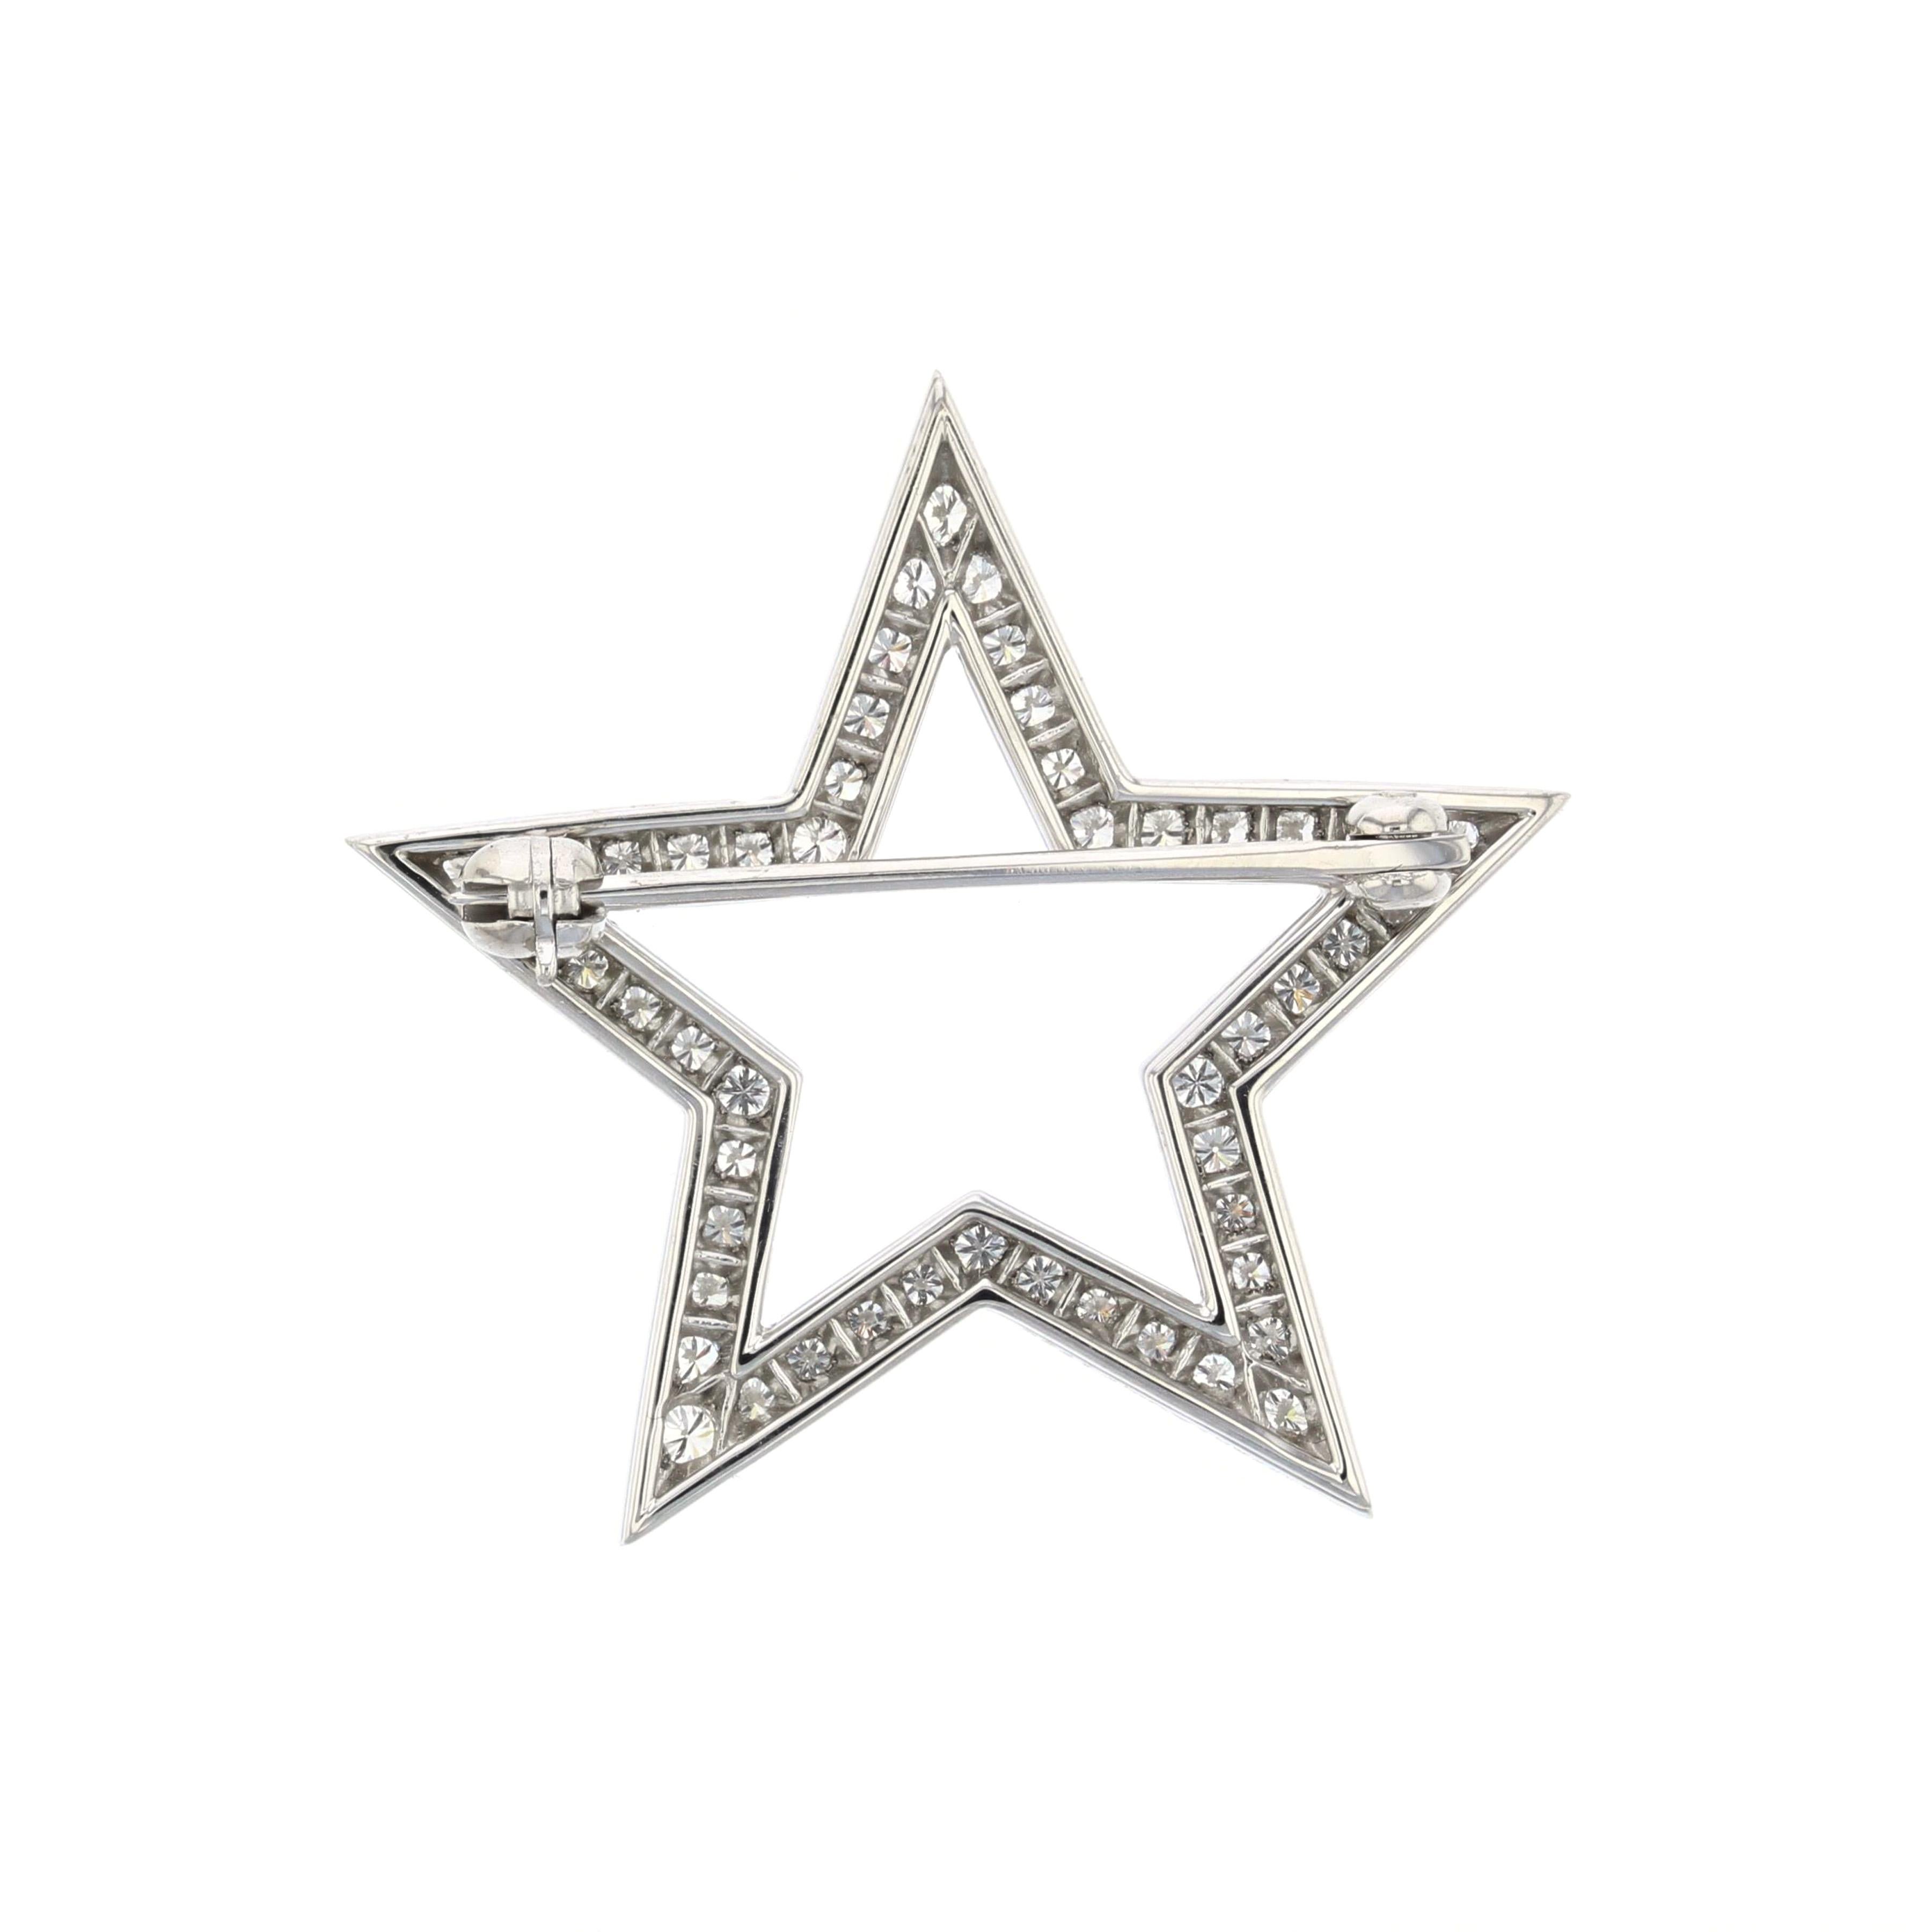 Tiffany & Co. platinum brooch with round diamonds in the shape of an open star.  Features fifty round diamonds totaling 0.85 carats, F-G color and VVS2-VS1 clarity.  Measures 1 1/8 inches across.  